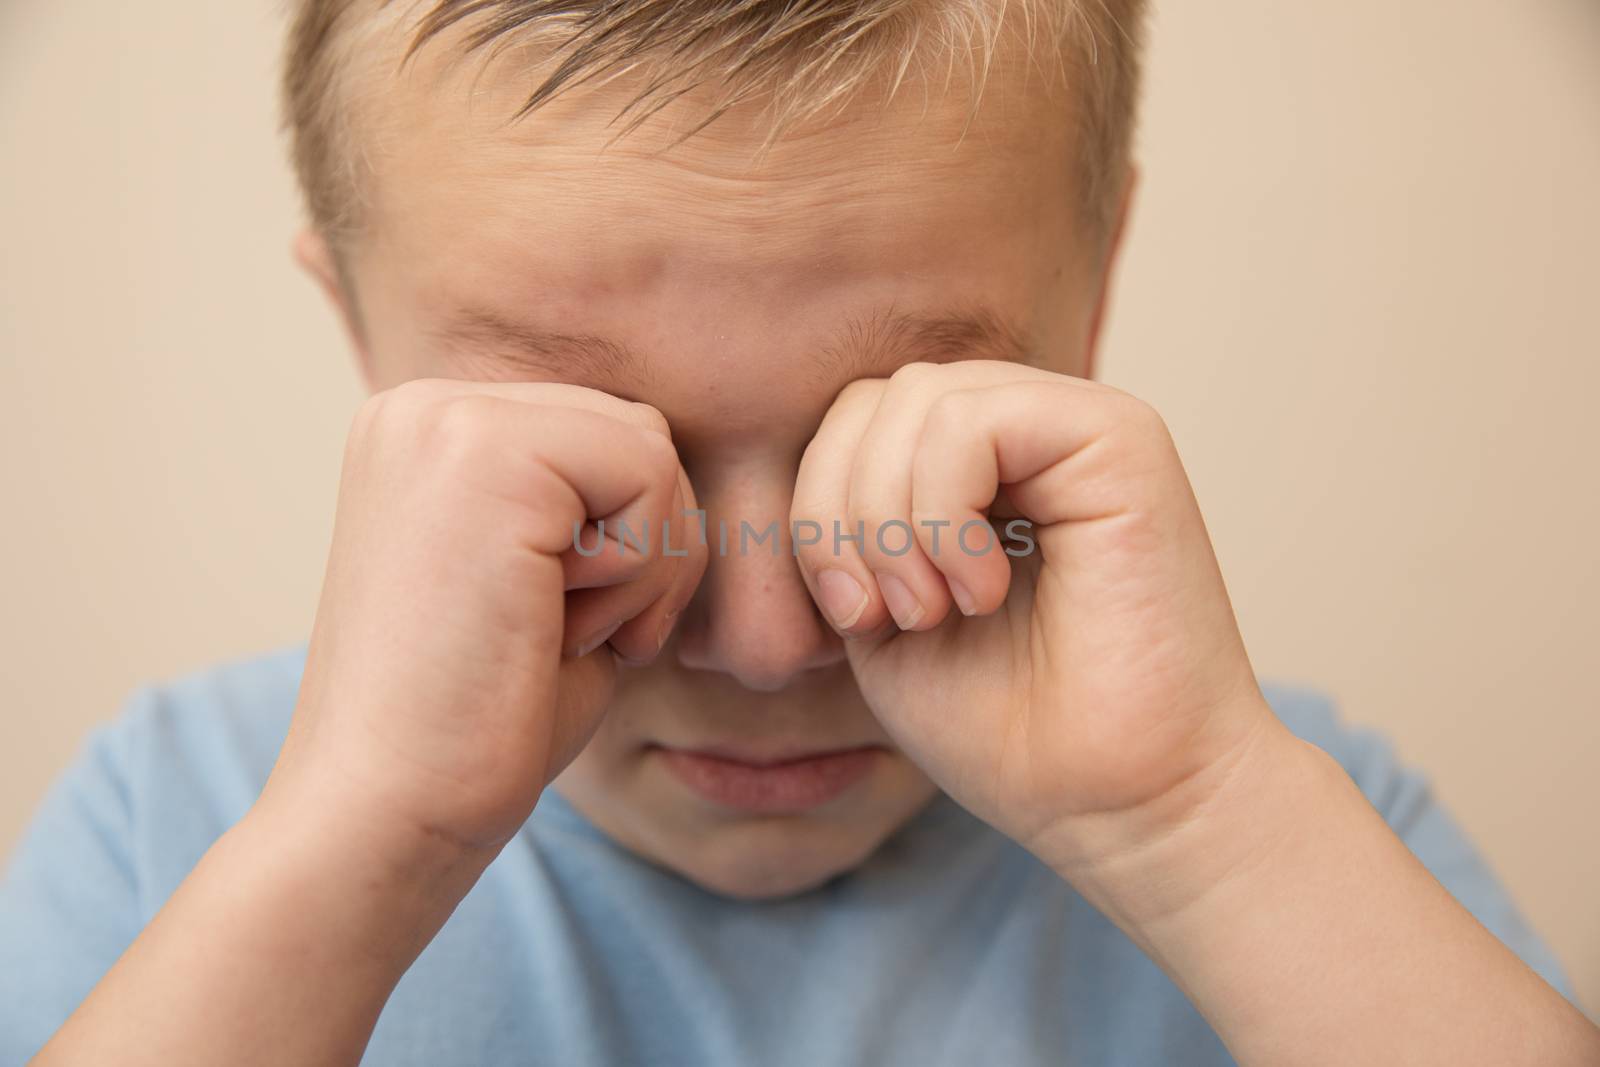 boy rubbing his eyes with his hands while he cries